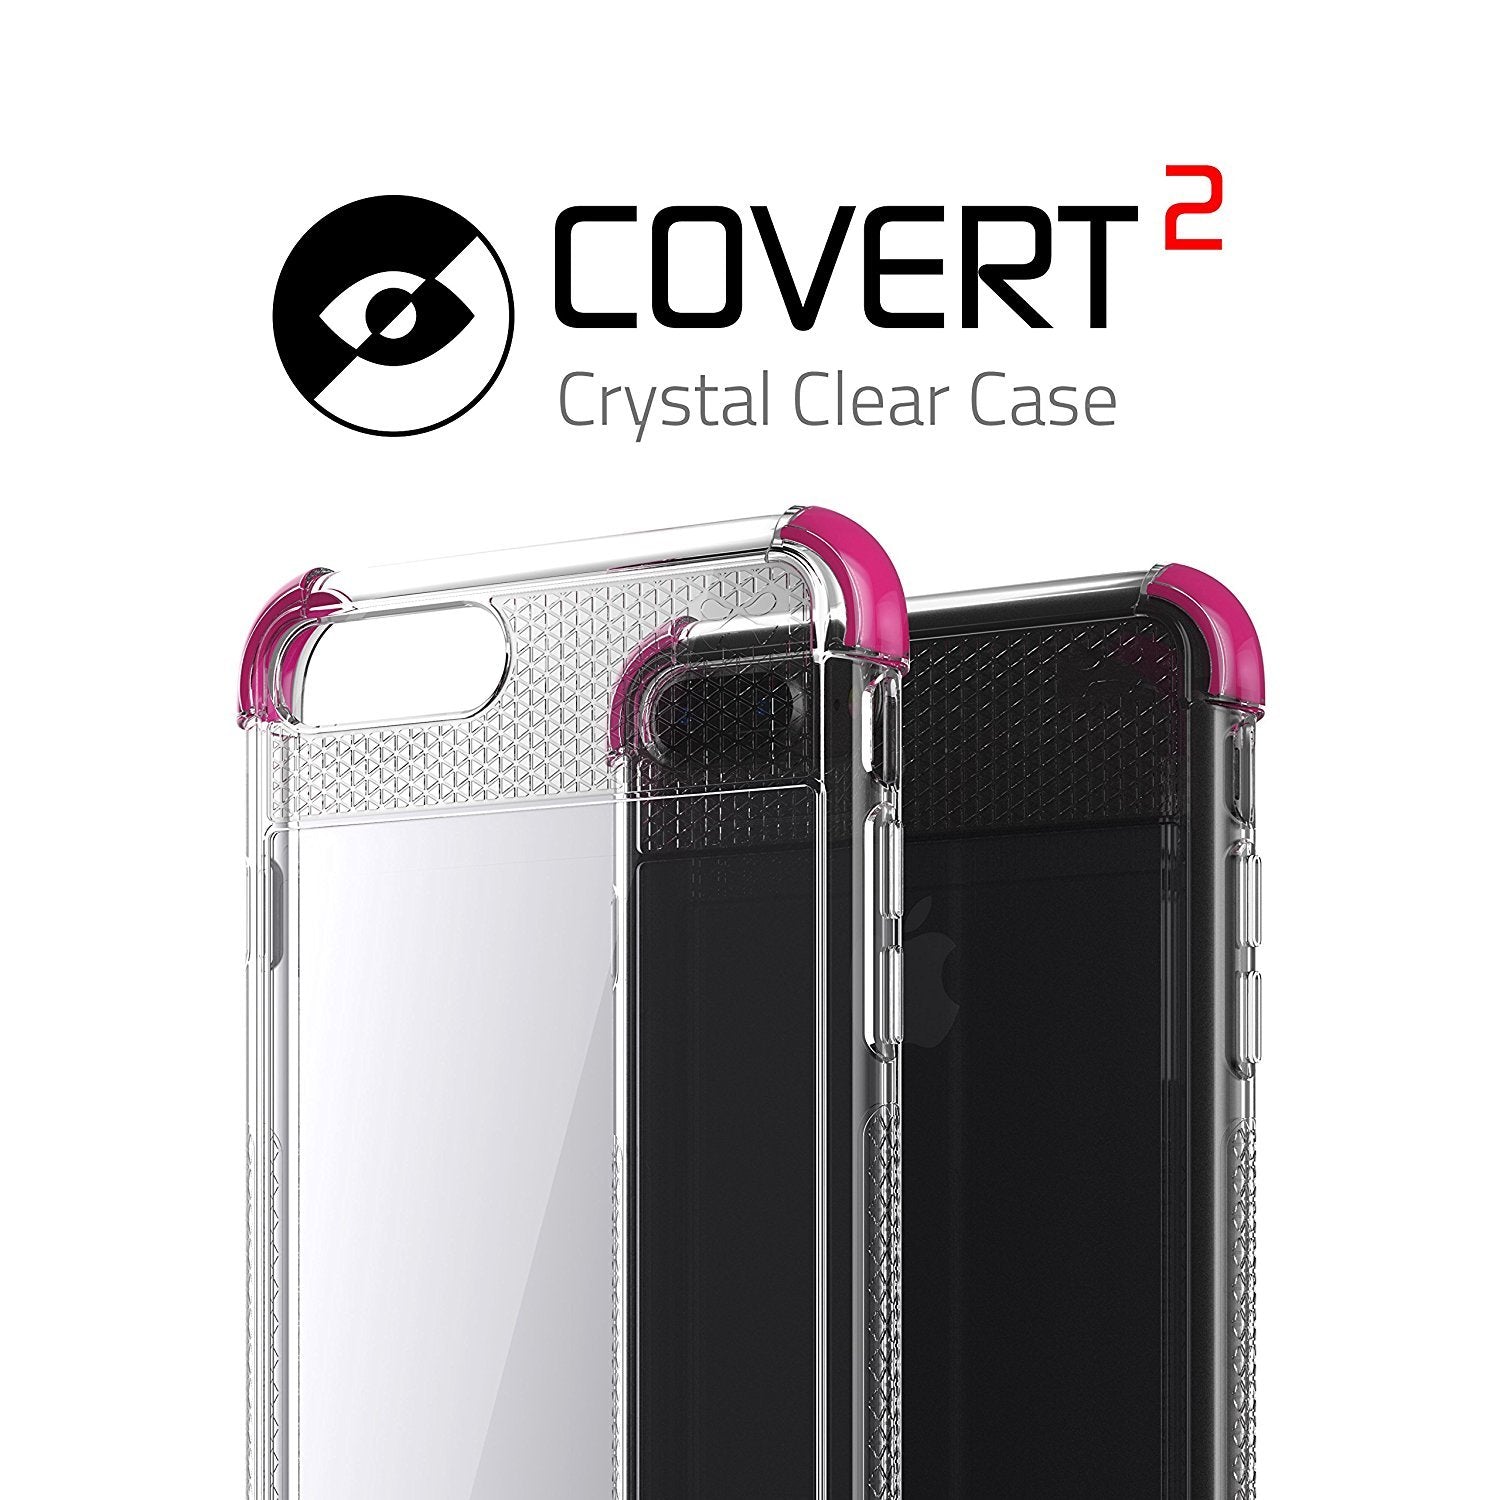 iPhone 7+ Plus Case, Ghostek Covert 2 Series for iPhone 7+ Plus Protective Case [ Pink]